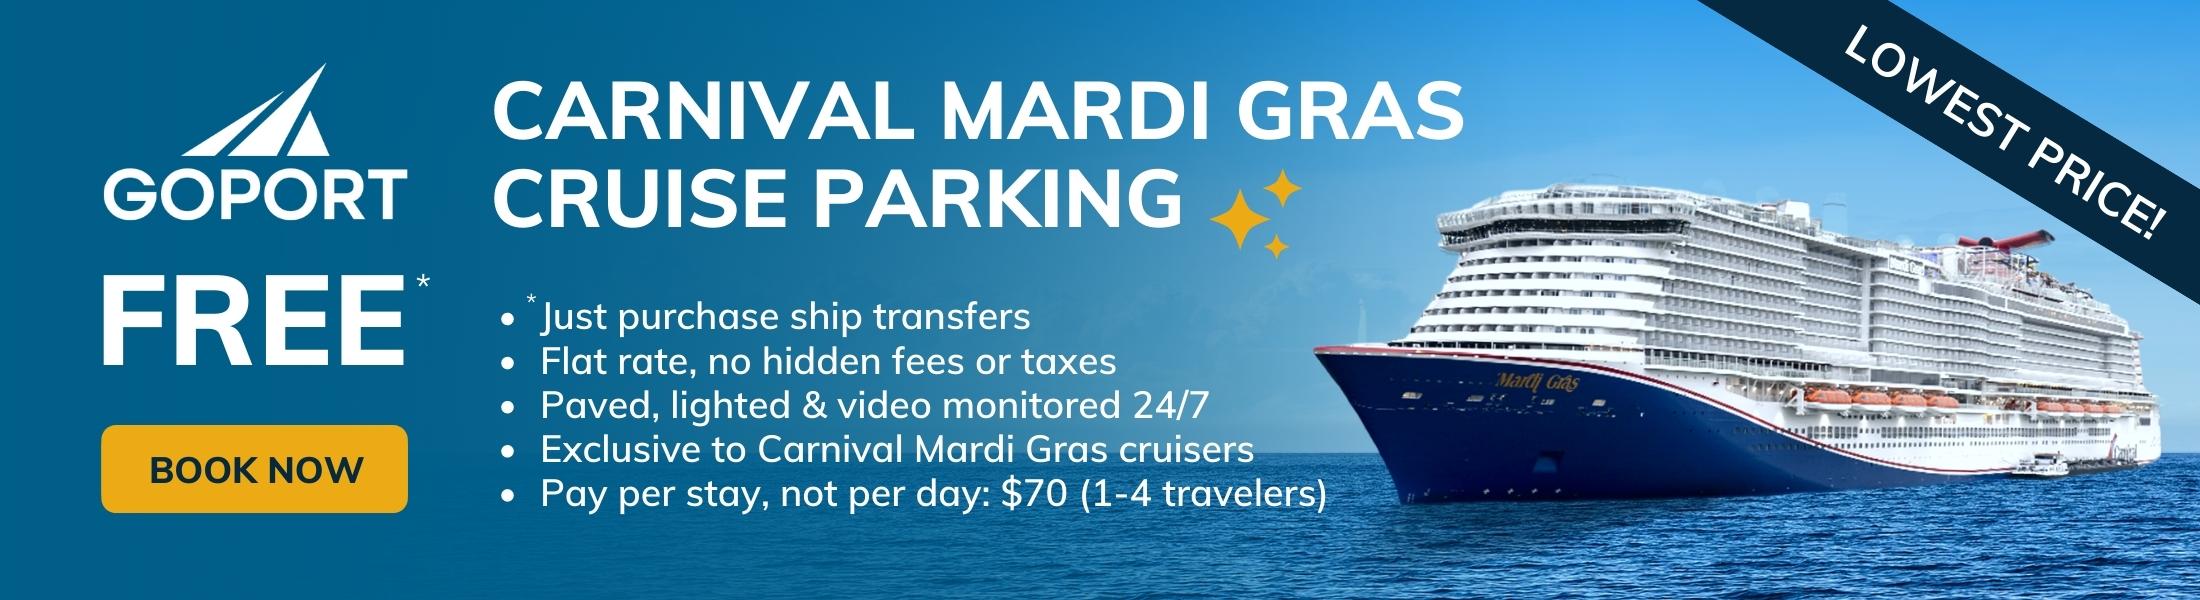 Carnival Mardi Gras Free Port Canaveral Parking with "Book Now" button